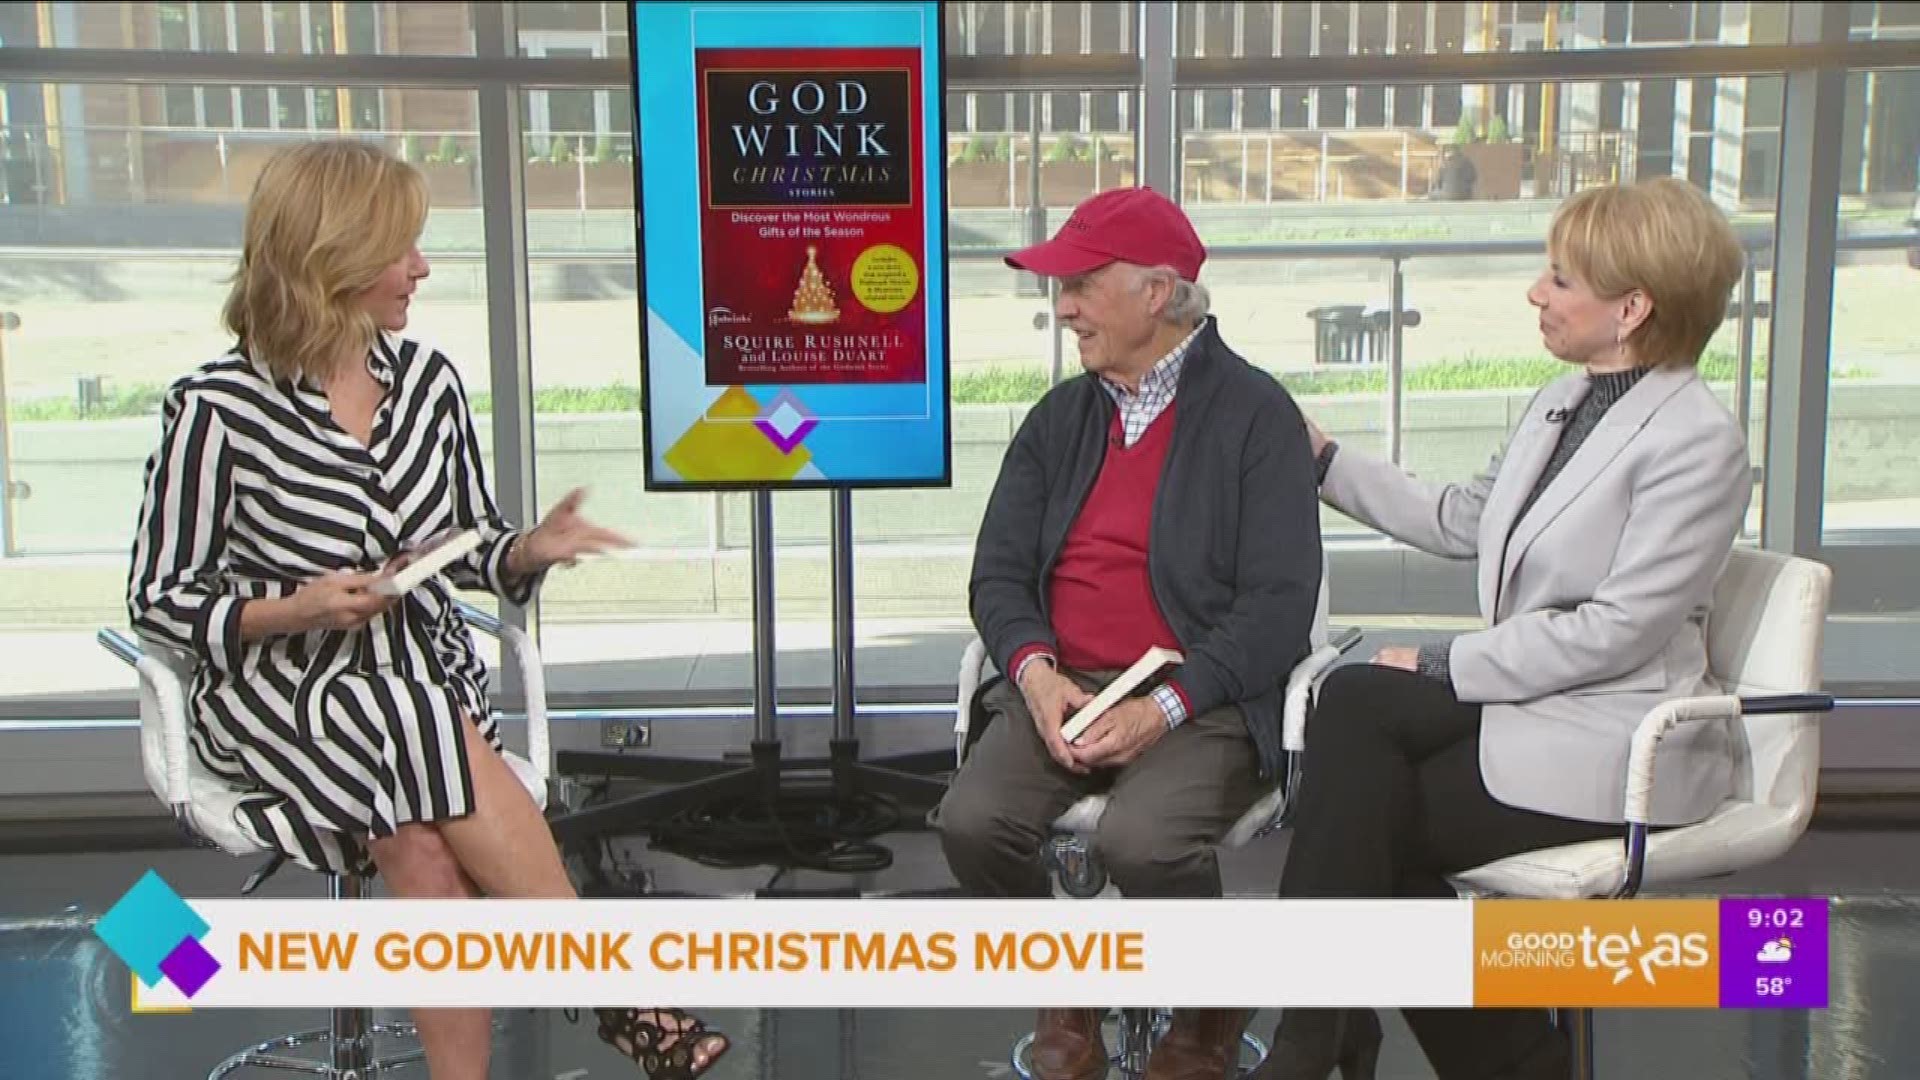 "A Godwink Christmas : Meant for Love premiers November 15 on Hallmark Movies & Mysteries.
Go to www.hallmark moviesandmysteries.com or www.godwinks.com.